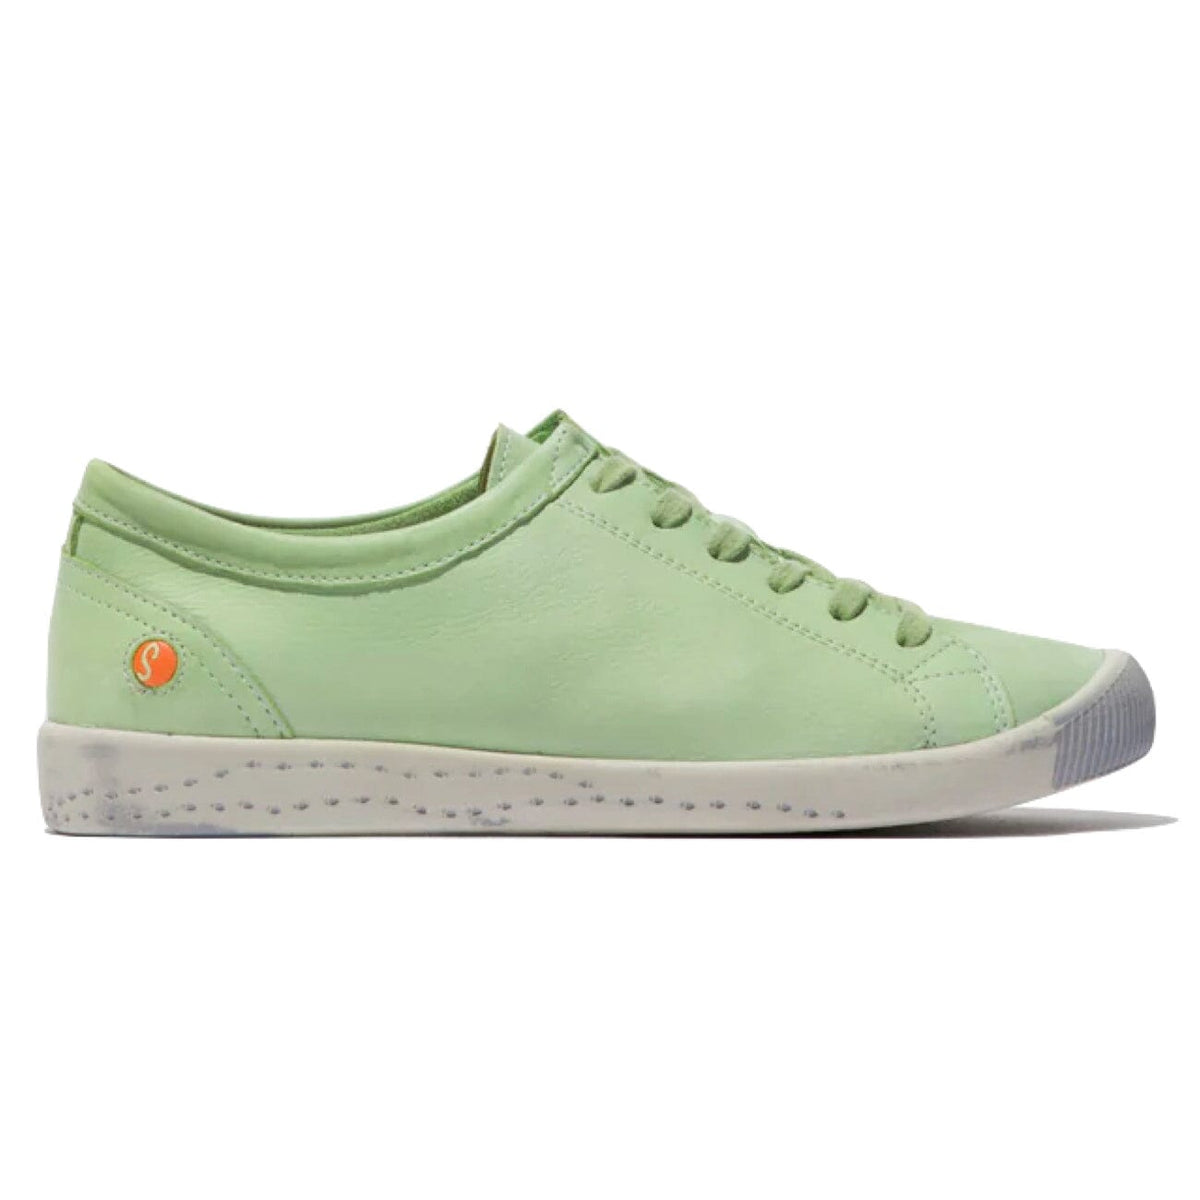 Softinos, Isla154, Laceup Shoe, Washed Leather, Light Green Shoes Softinos 